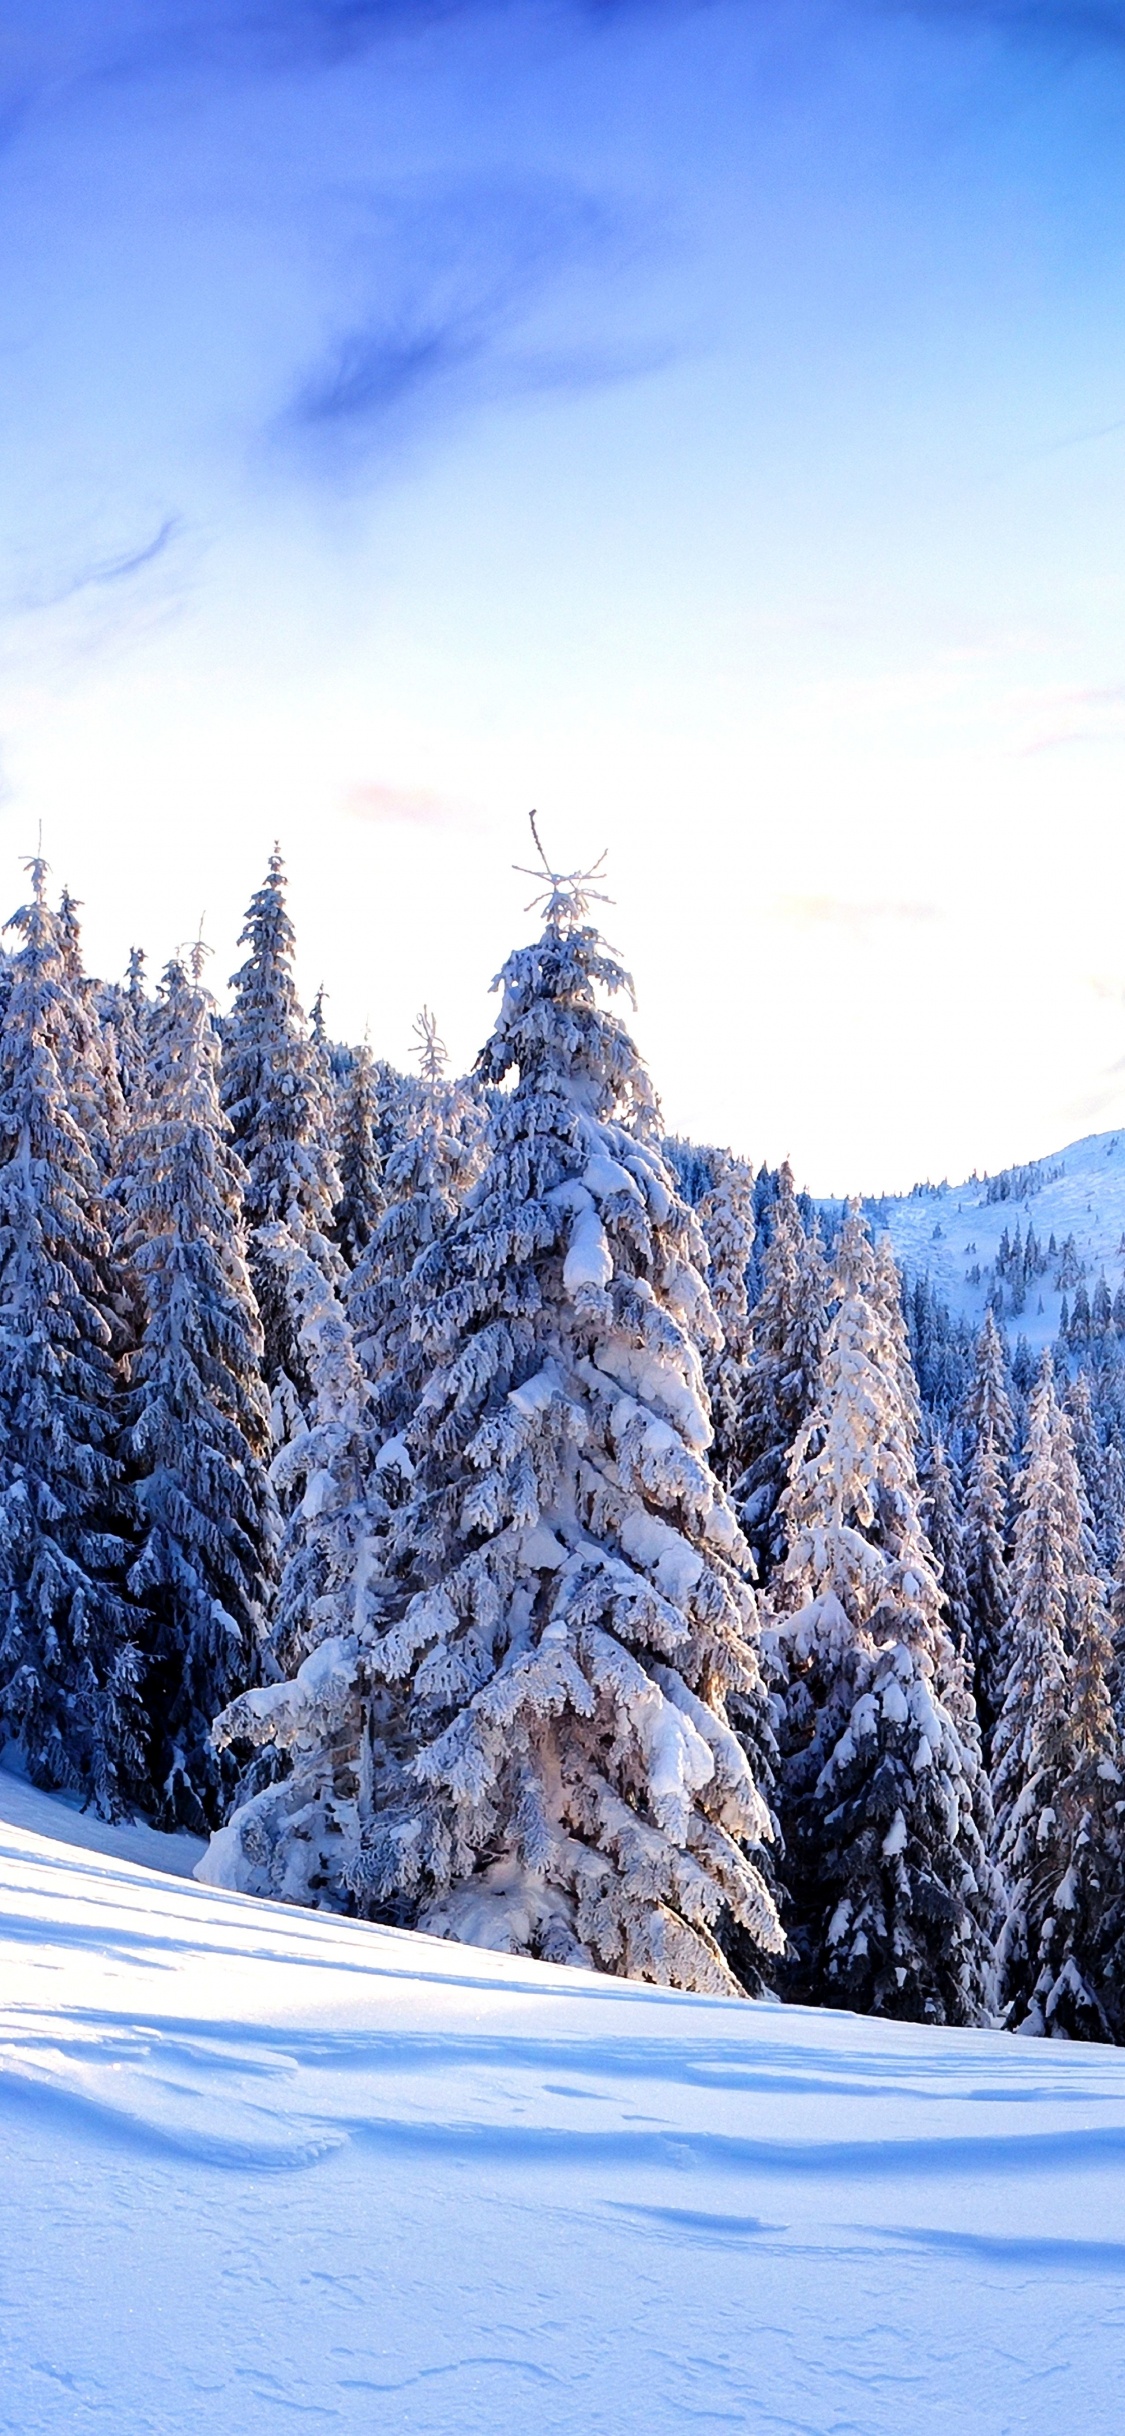 Snow Covered Pine Trees and Mountains During Daytime. Wallpaper in 1125x2436 Resolution